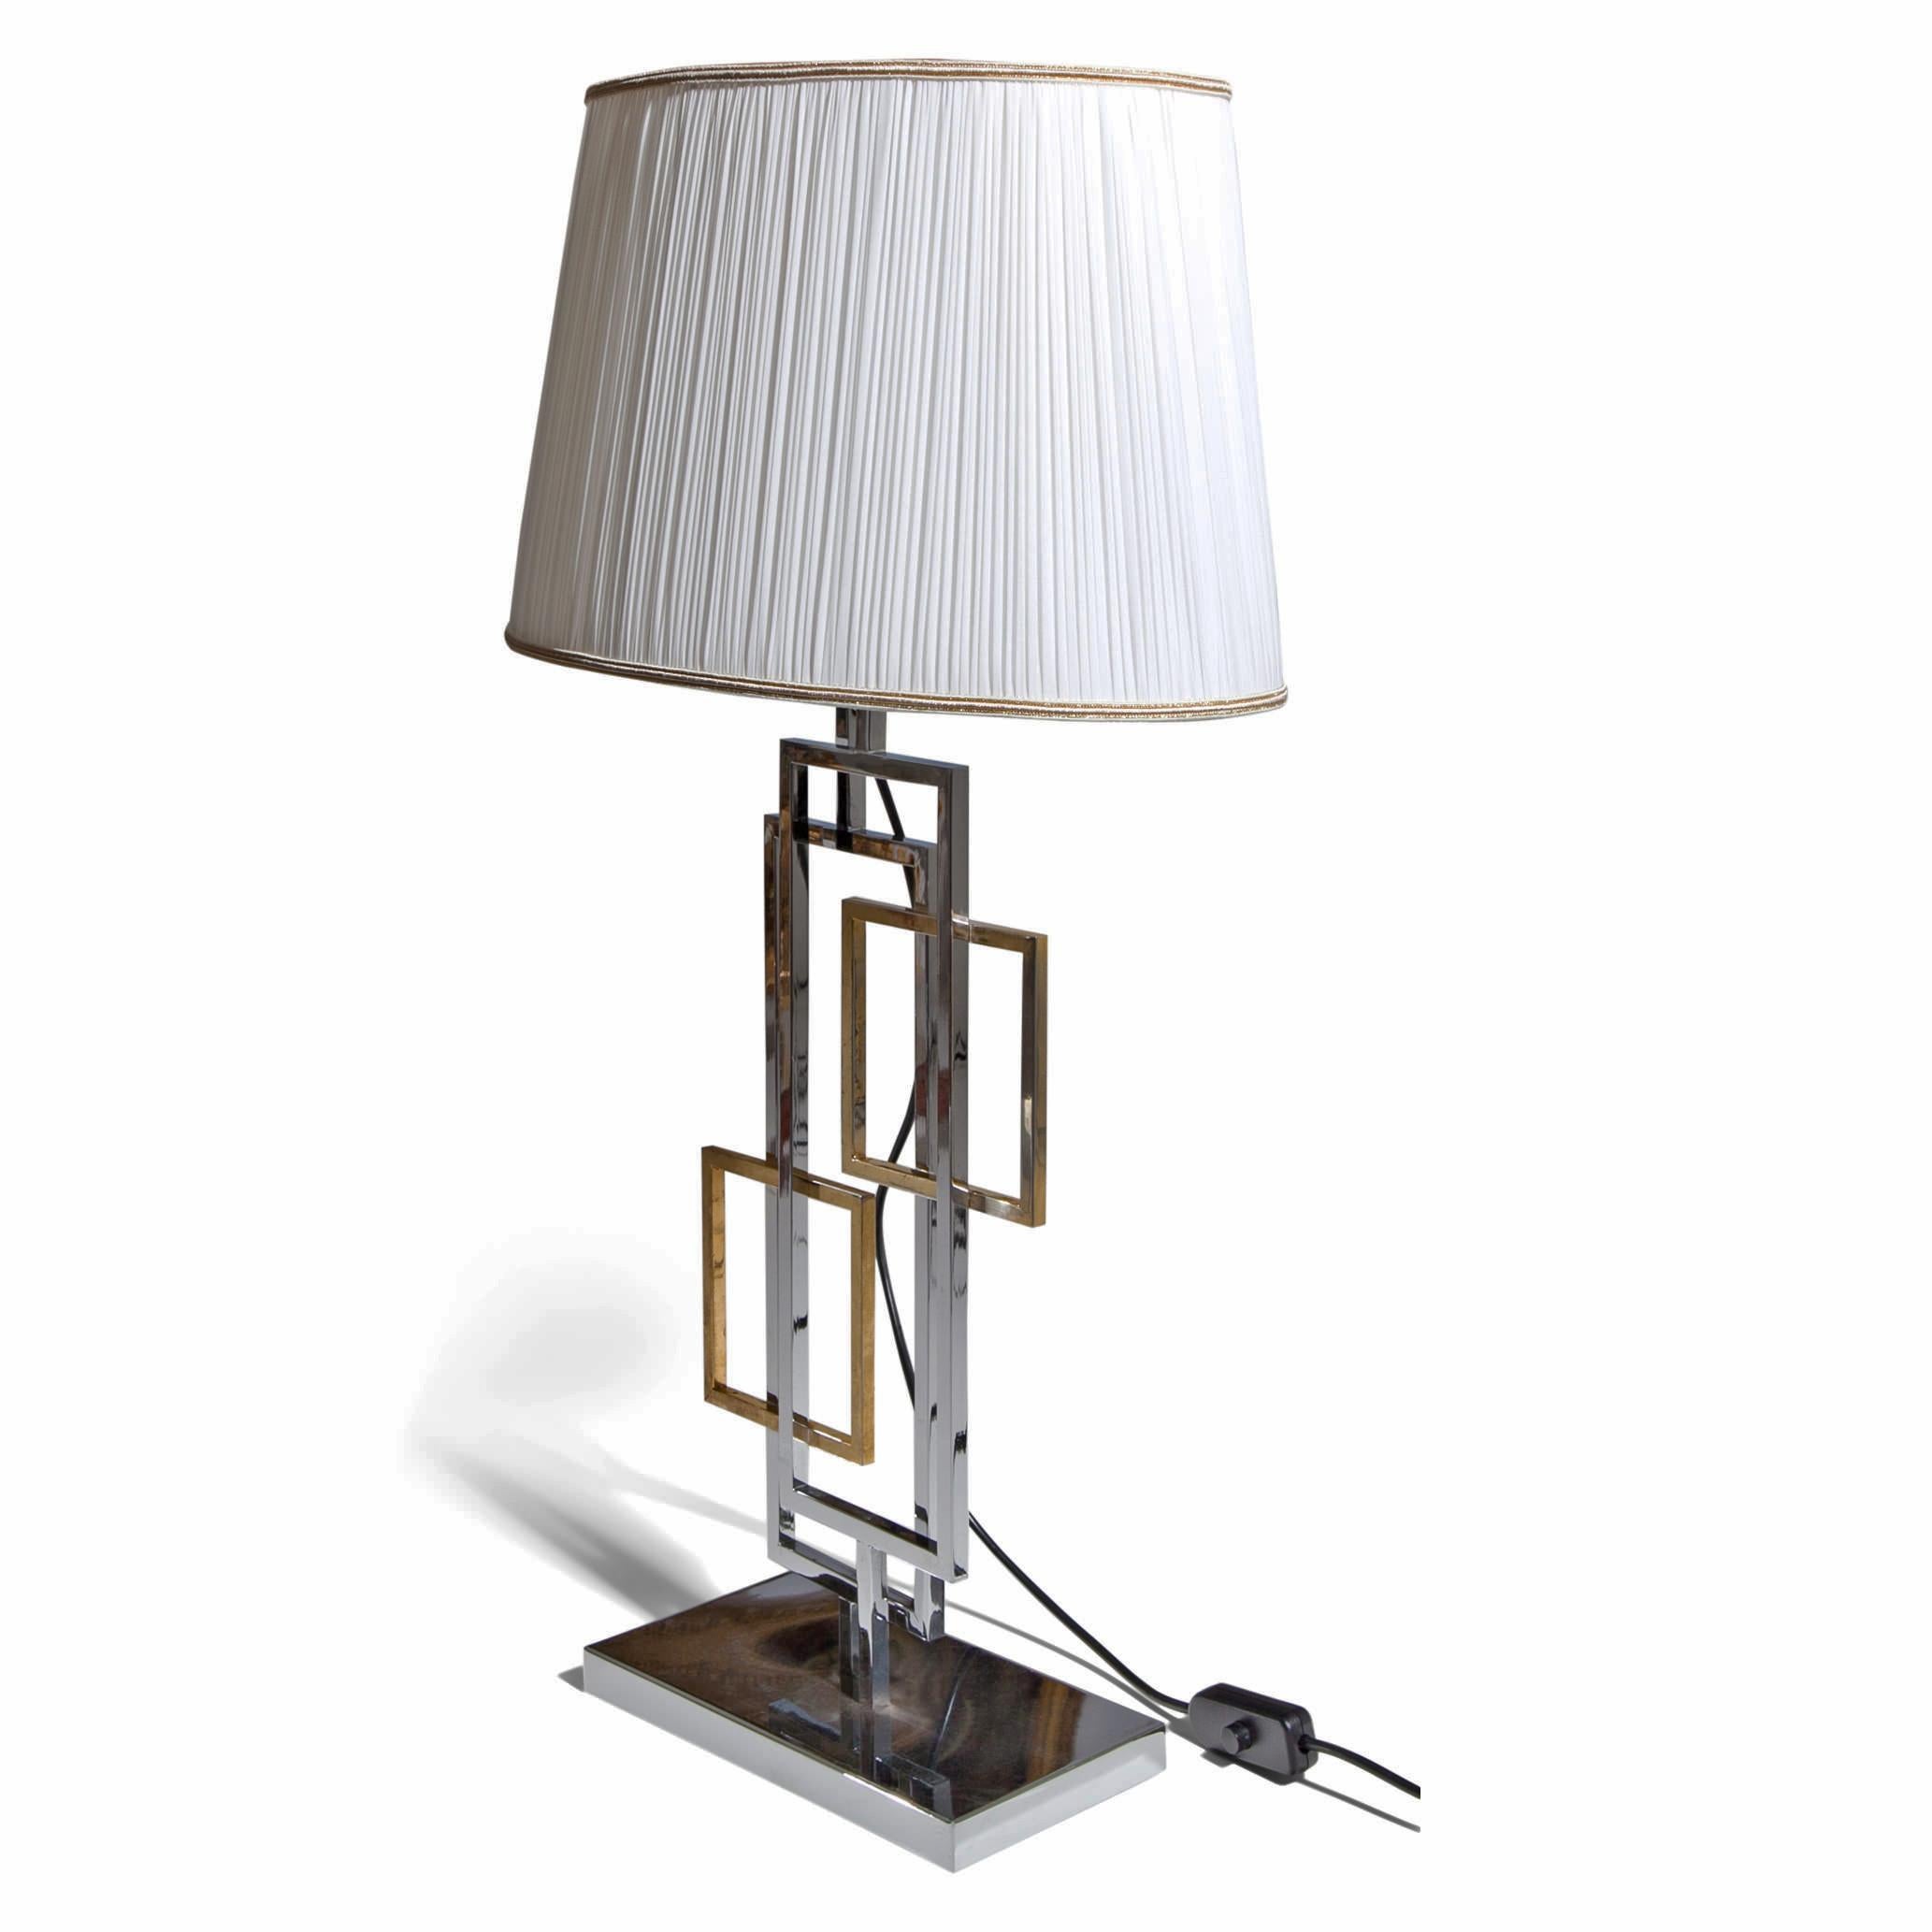 Italian Lamp in the style of Romeo Rega standing on a rectangular chrome foot with geometrical forms out of brass and metal and a beige lamp shade (recent). 

For the electrification we assume no liability and no warranty.